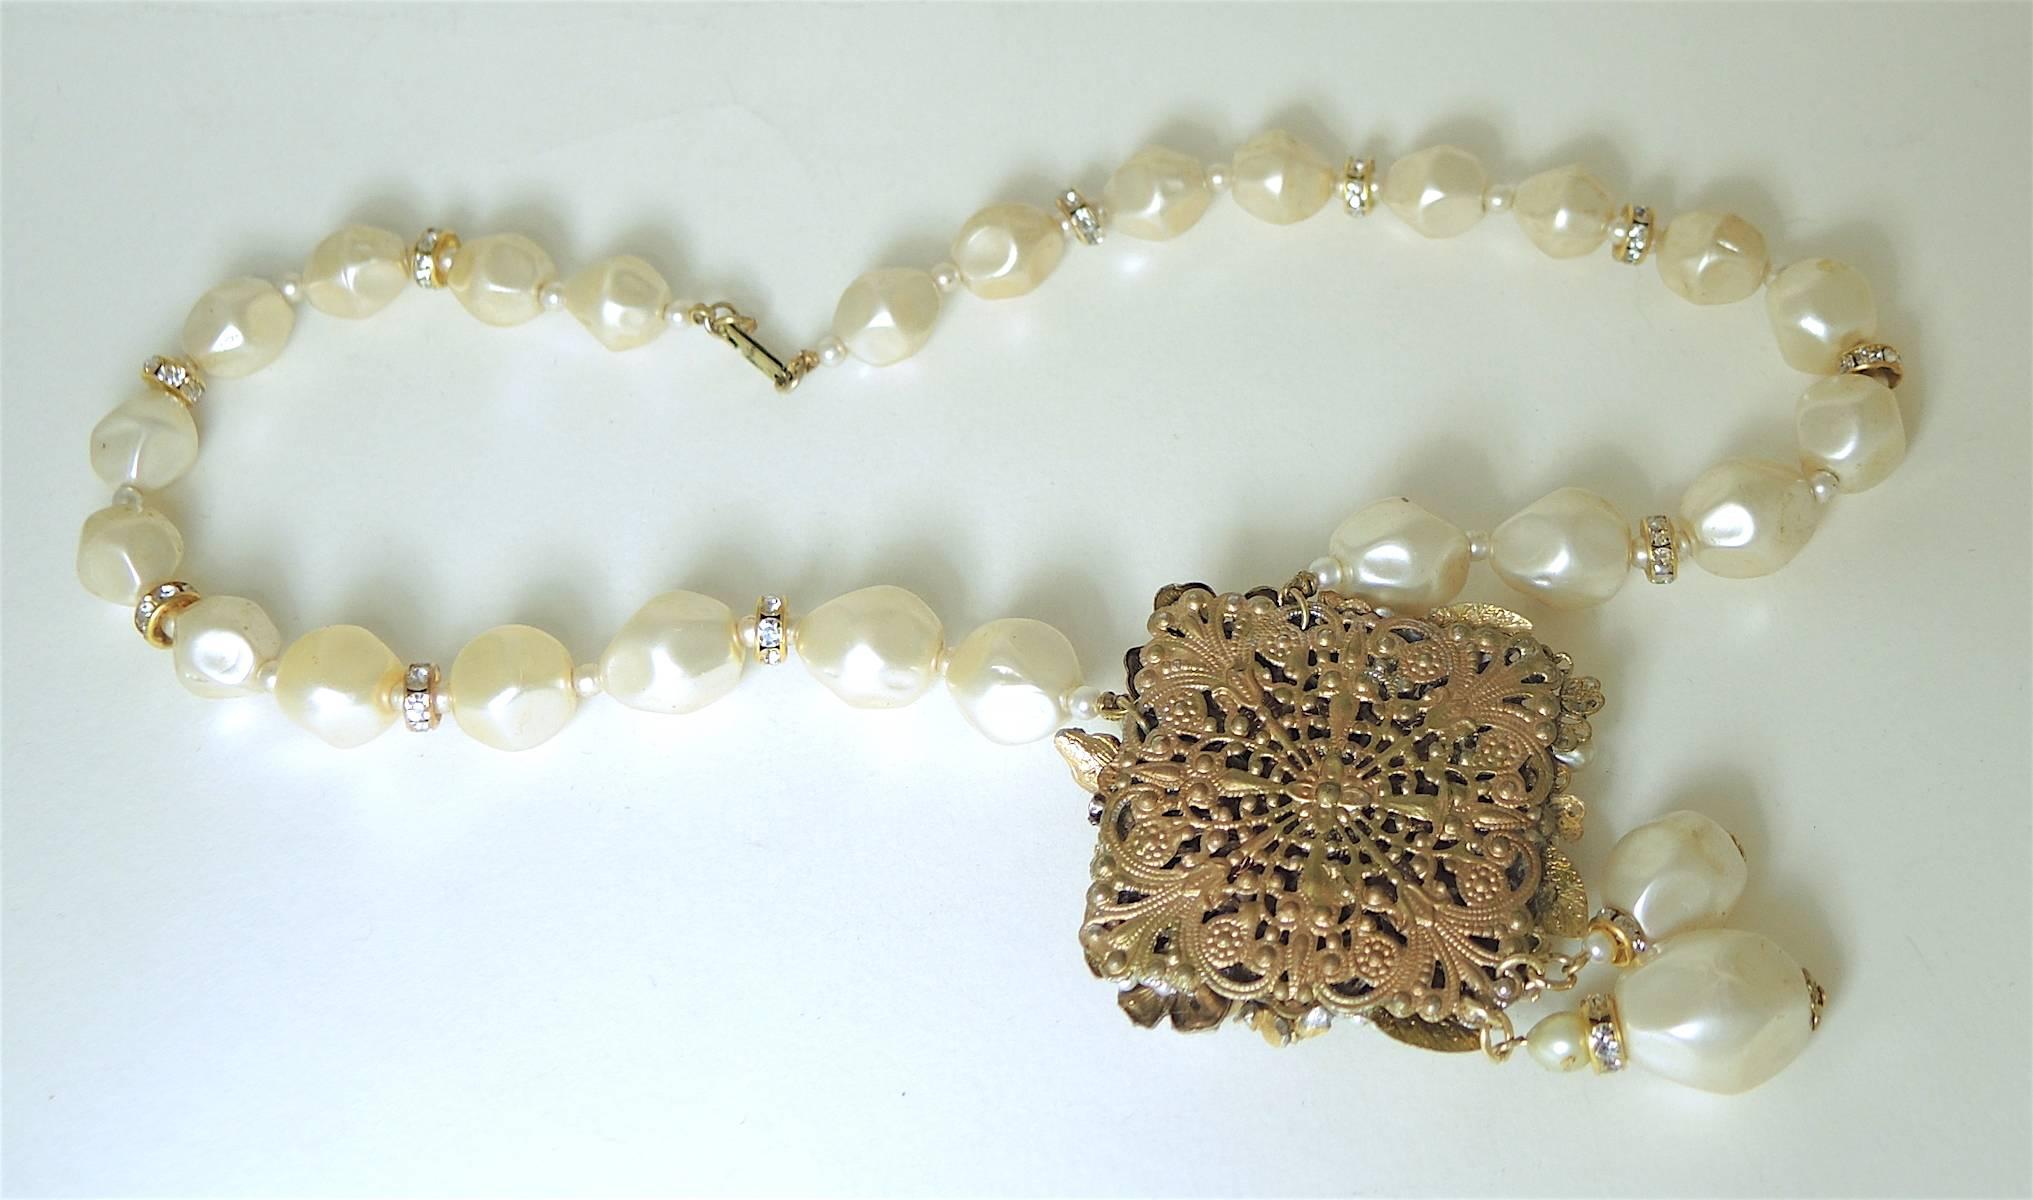 Women's Miriam Haskell Vintage Classic Faux Pearl Drop Necklace, 1950s